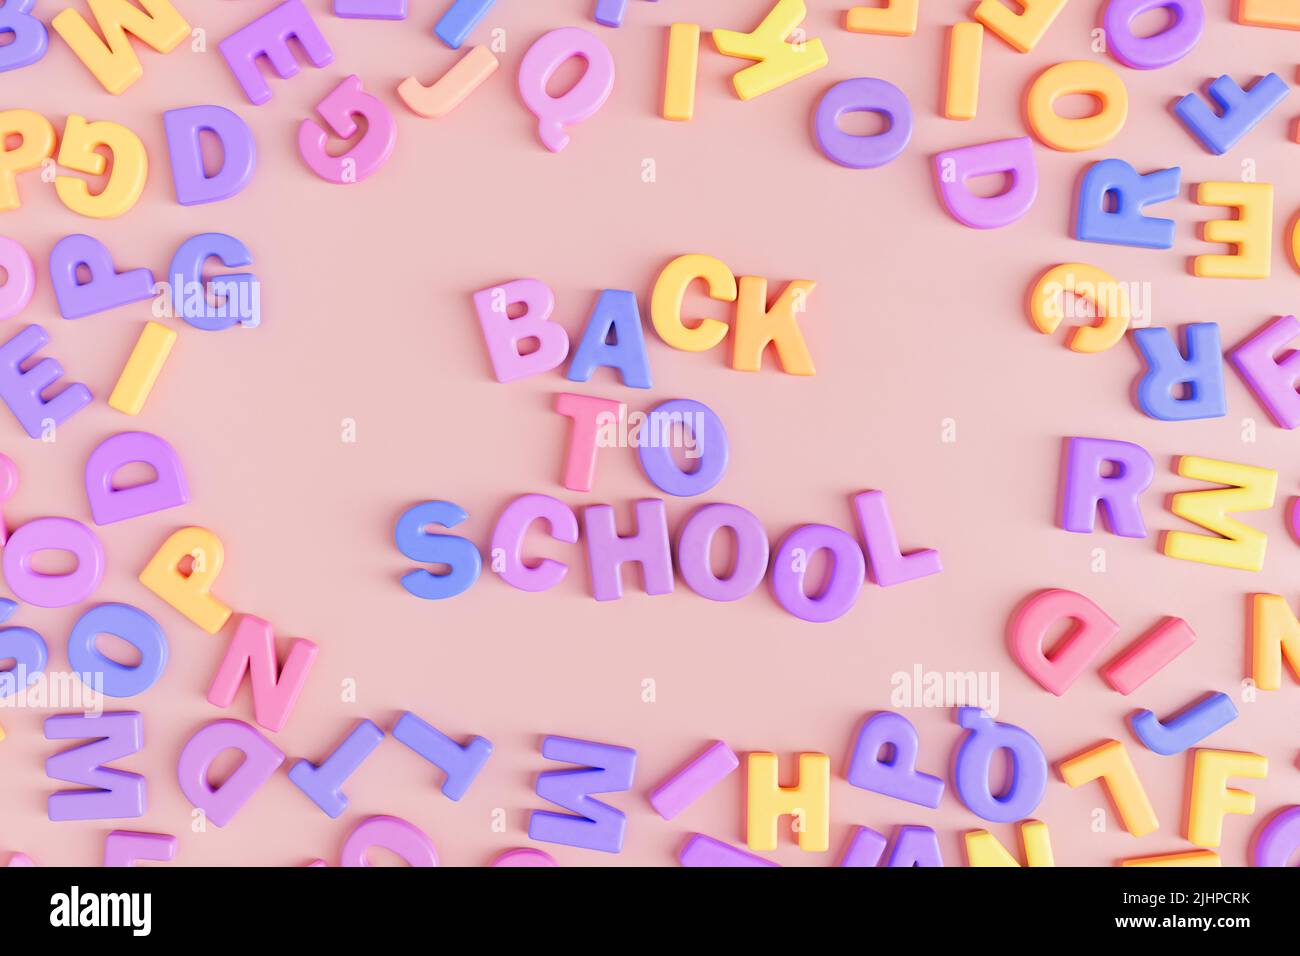 Top view 3D illustration of Back To School inscription made with colorful plastic letters scattered on pink background Stock Photo